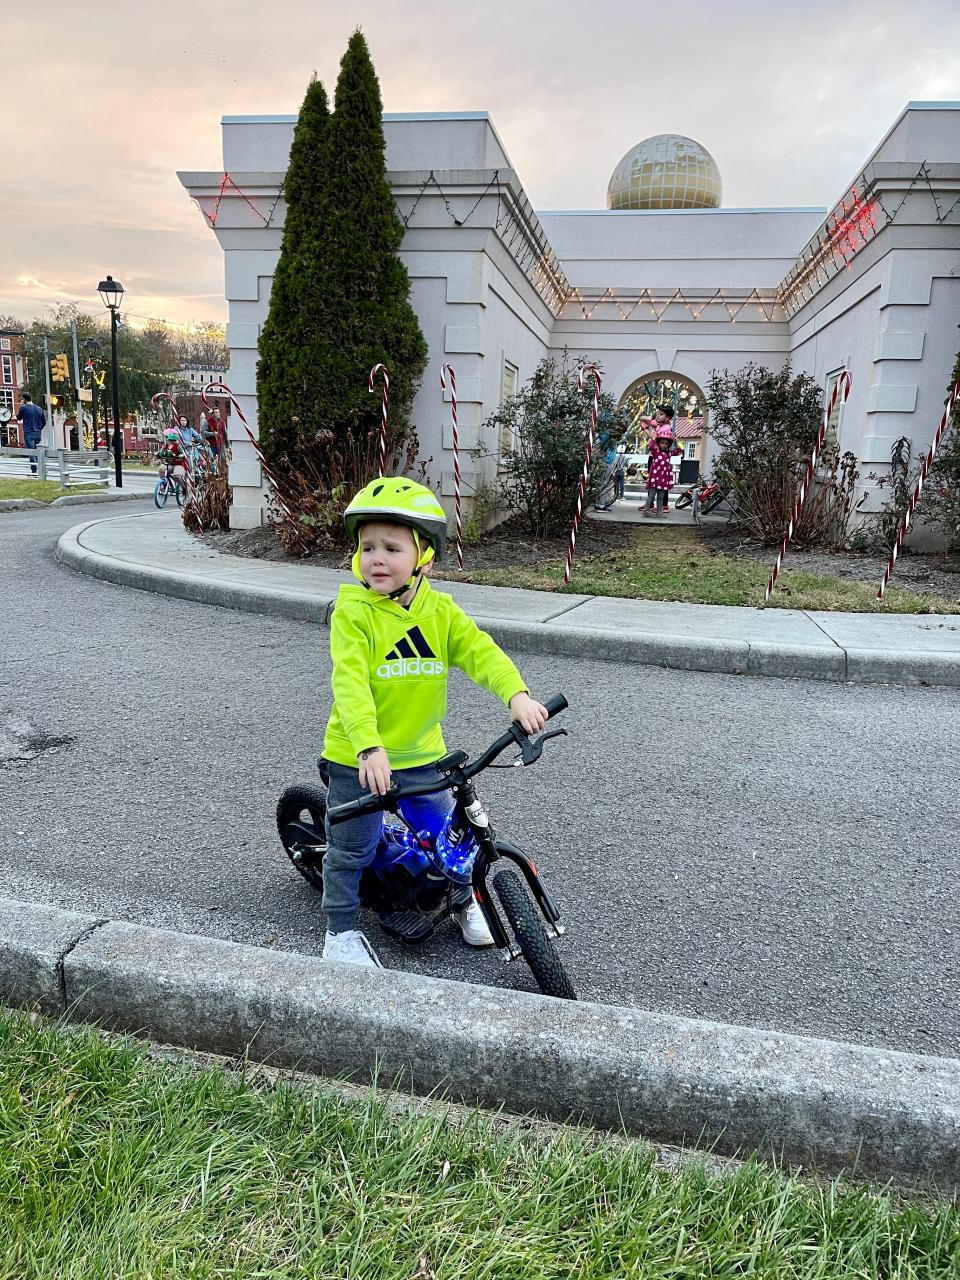 Four-year-old Everett Mattson was happy to explore Safety City on his bike that was decked out with lights he got for his birthday. Dec. 1, 2021.